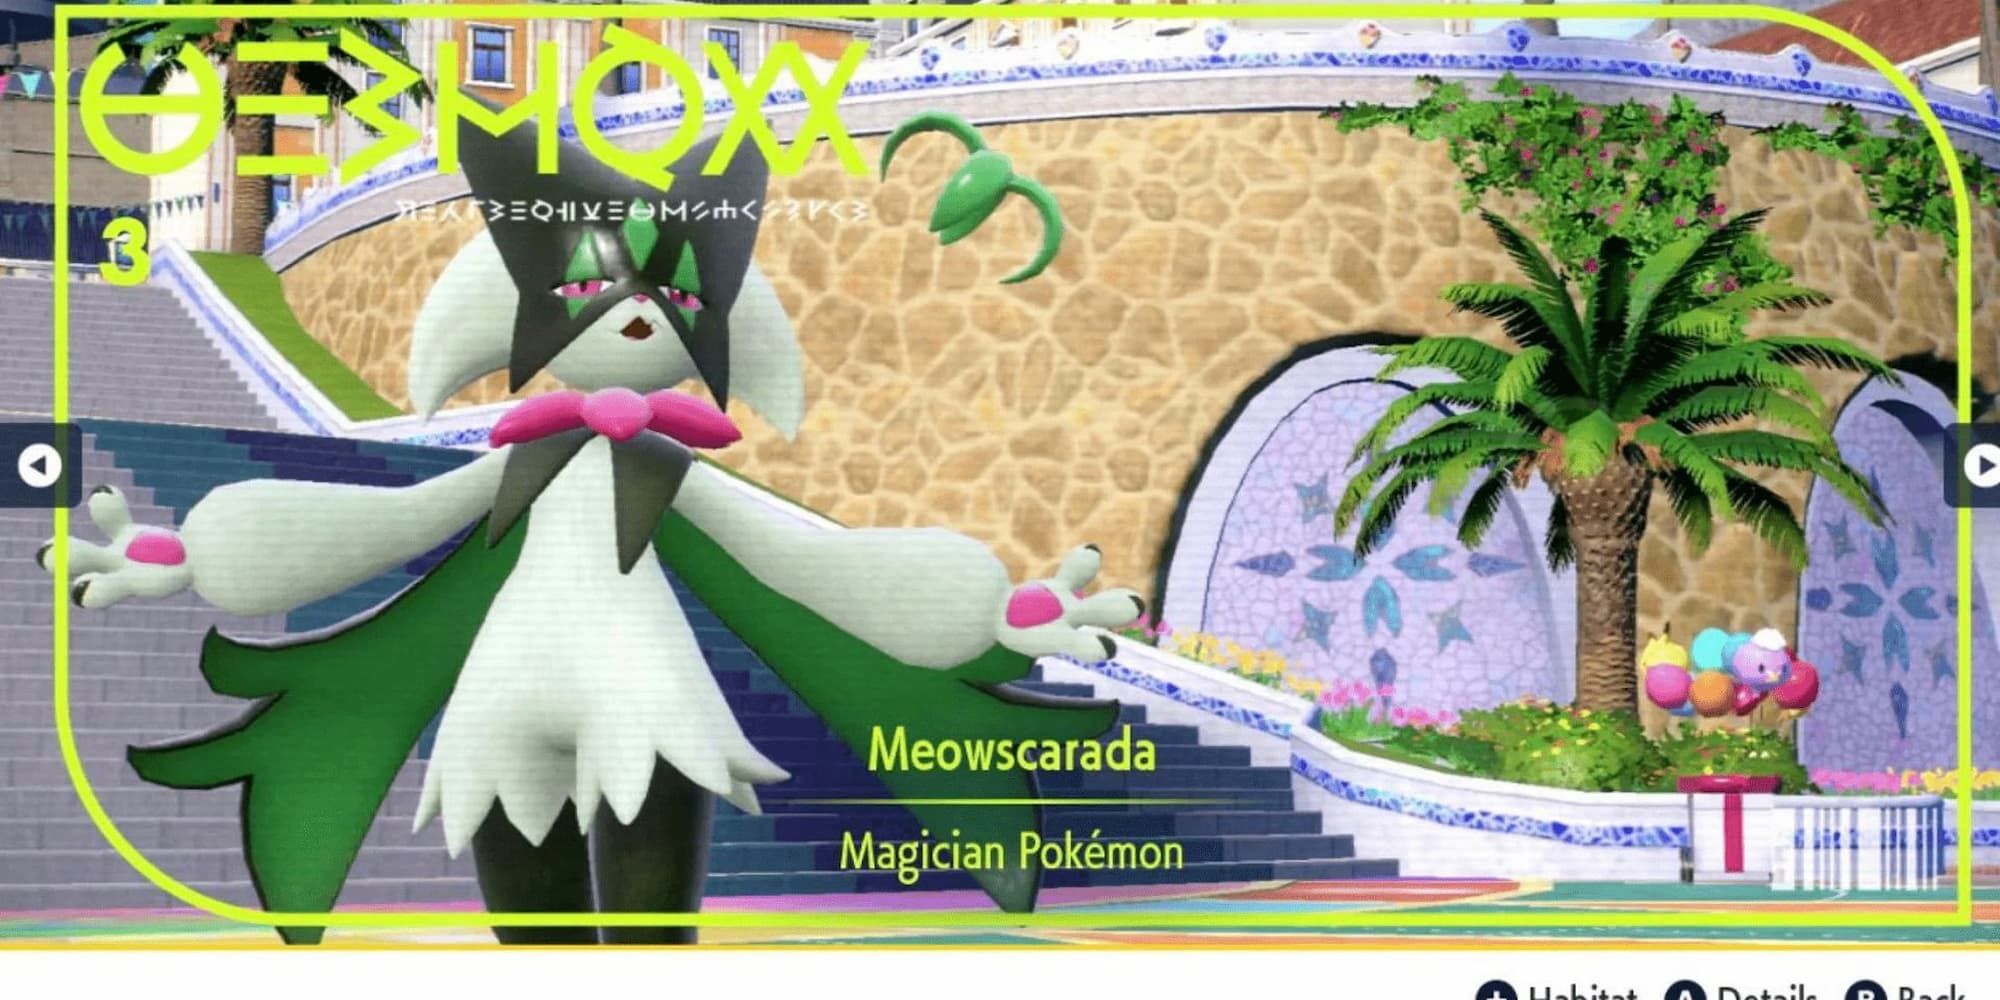 Meowscarada's Pokedex image indicates it is the Magician Pokemon as it stands in a town square performing.